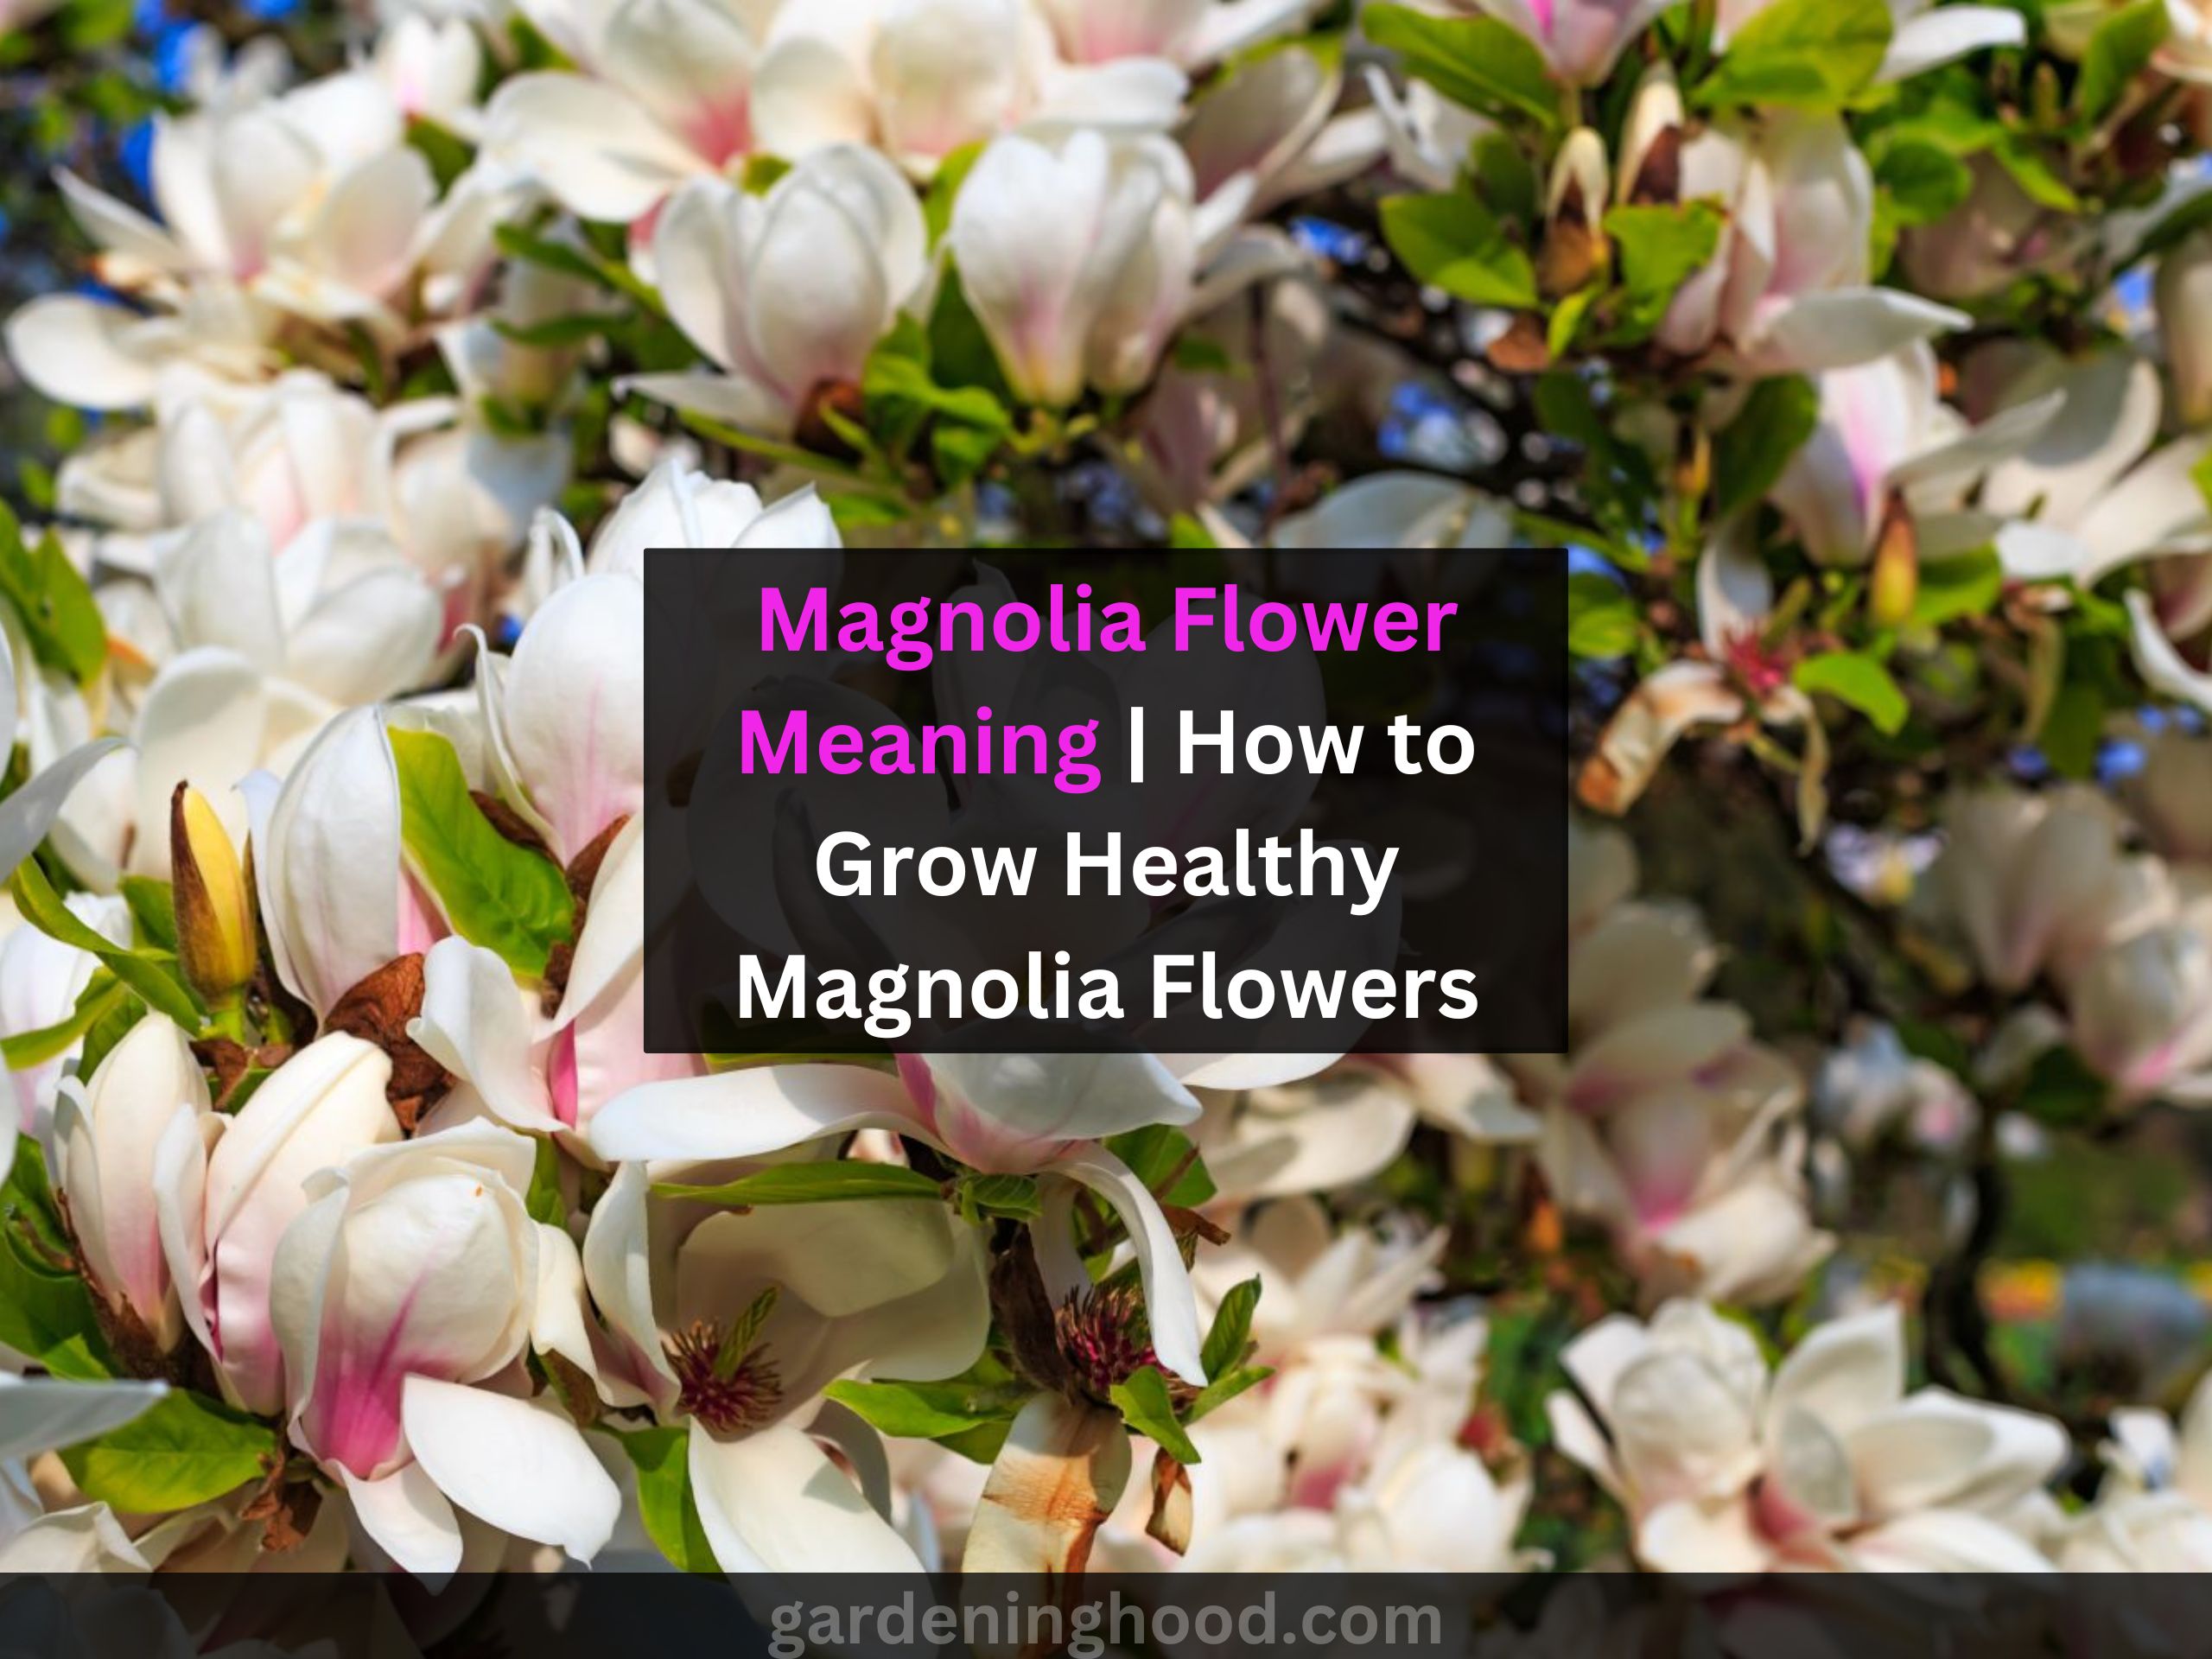 Magnolia Flower Meaning | How to Grow Healthy Magnolia Flowers